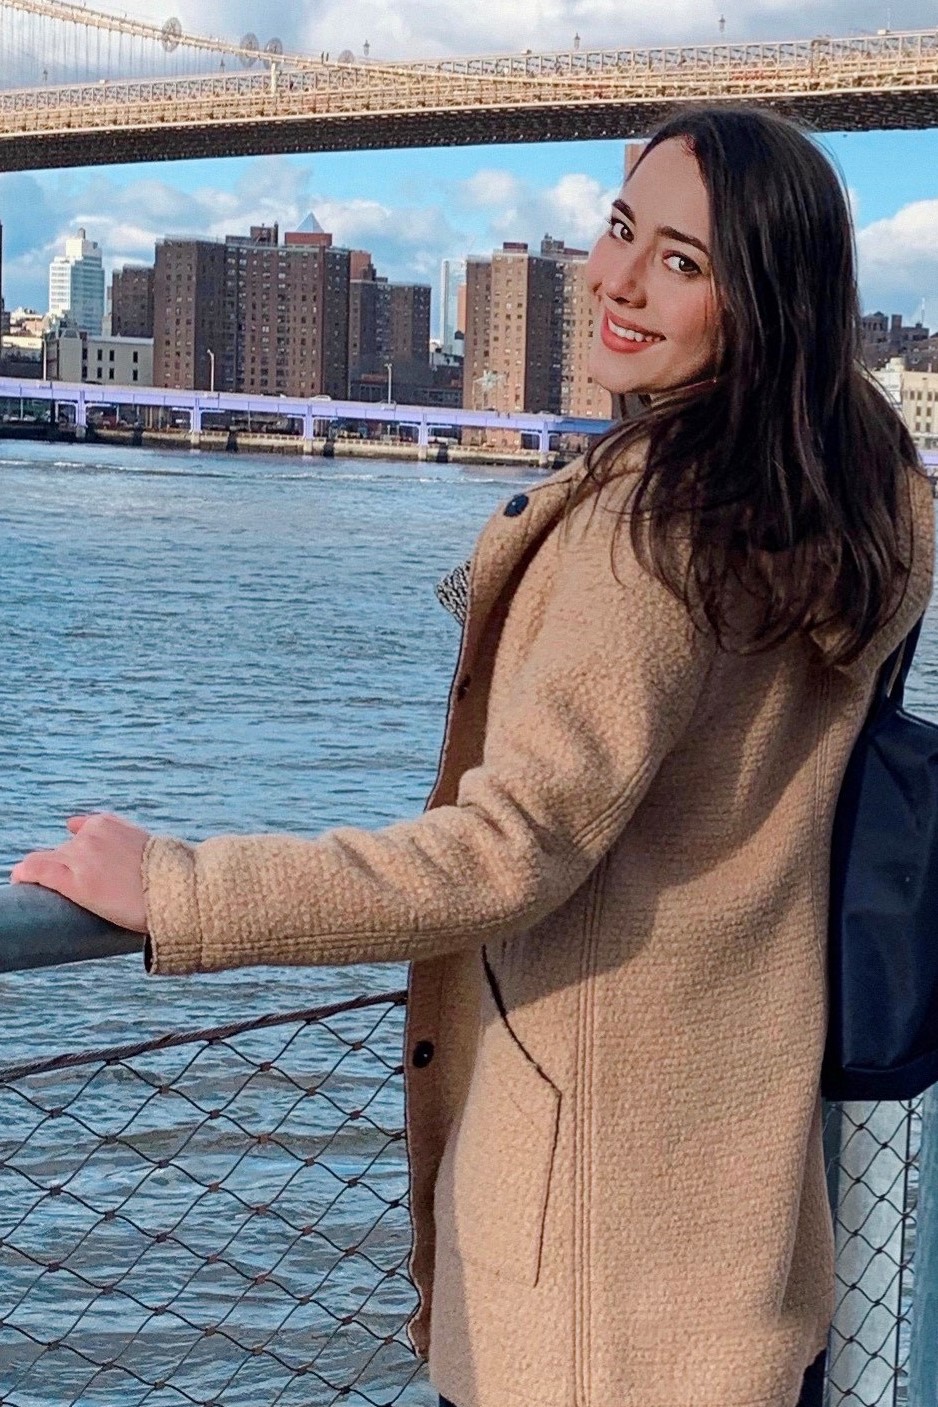 Lindsay Toia, Bentley Class of 2022, is a former figure skater turned marketing wiz.